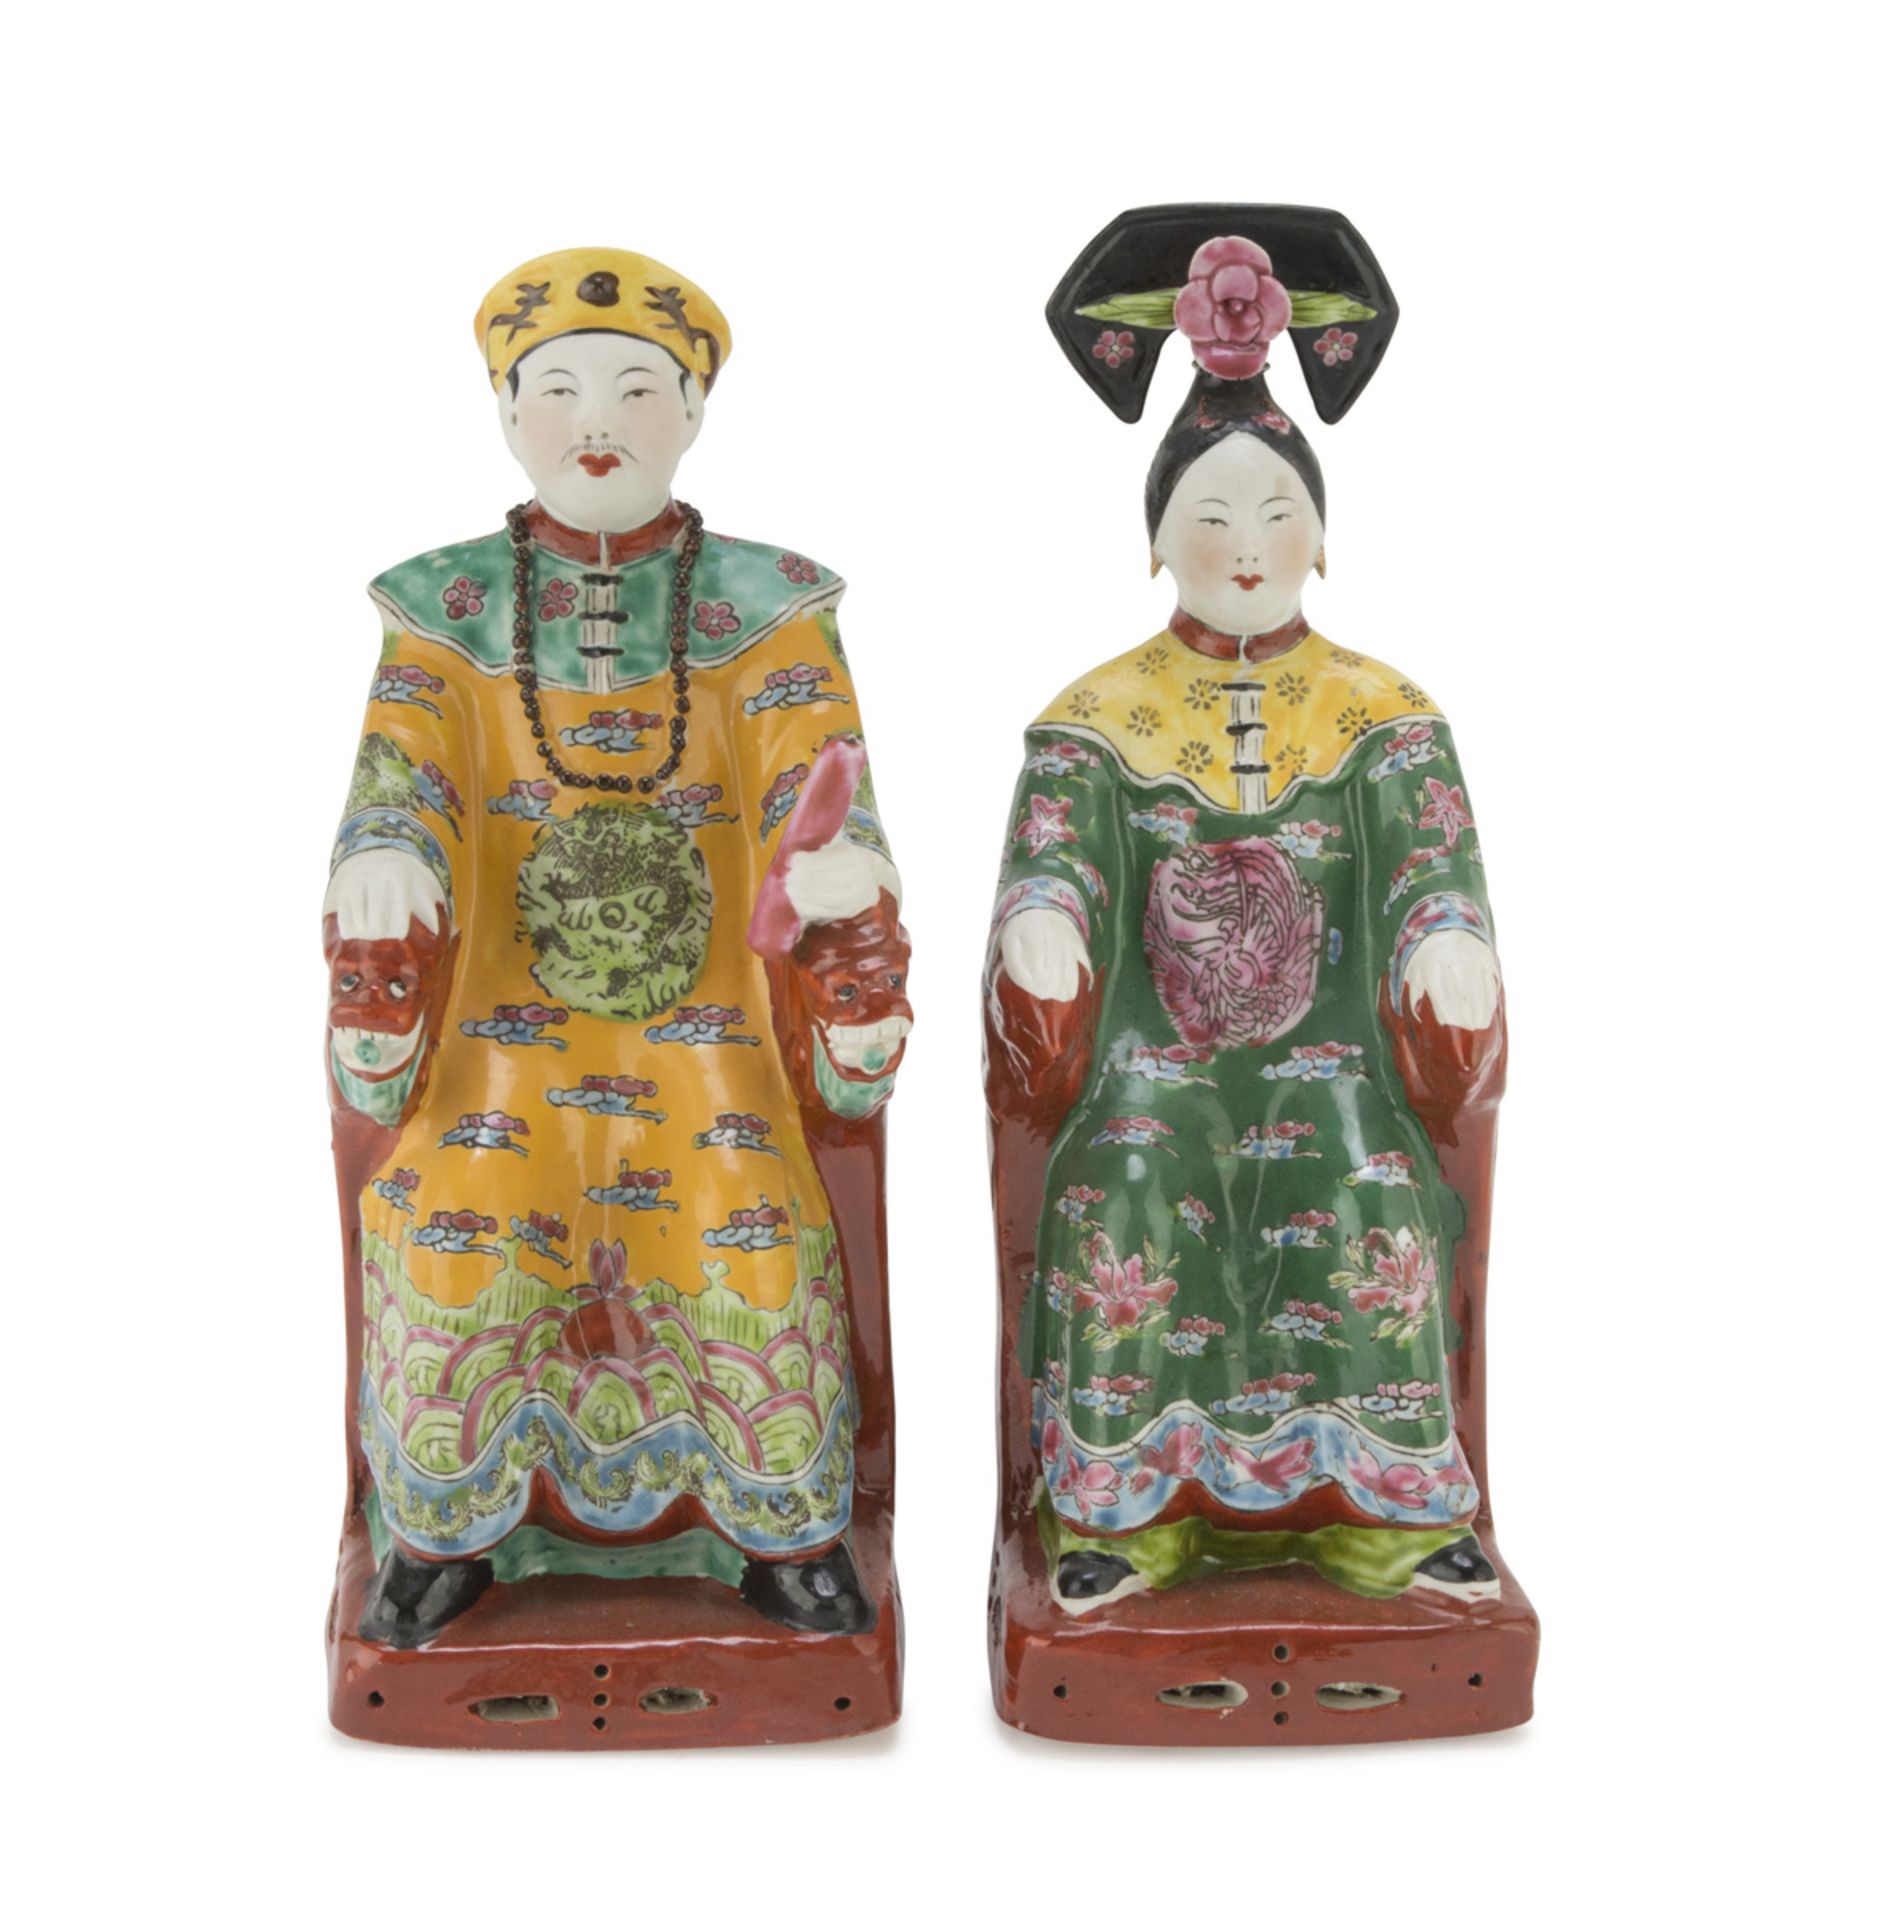 A PAIR OF PORCELAIN SCULPTURES IN POLYCHROME ENAMELS, CHINA 20TH CENTURY representing two official